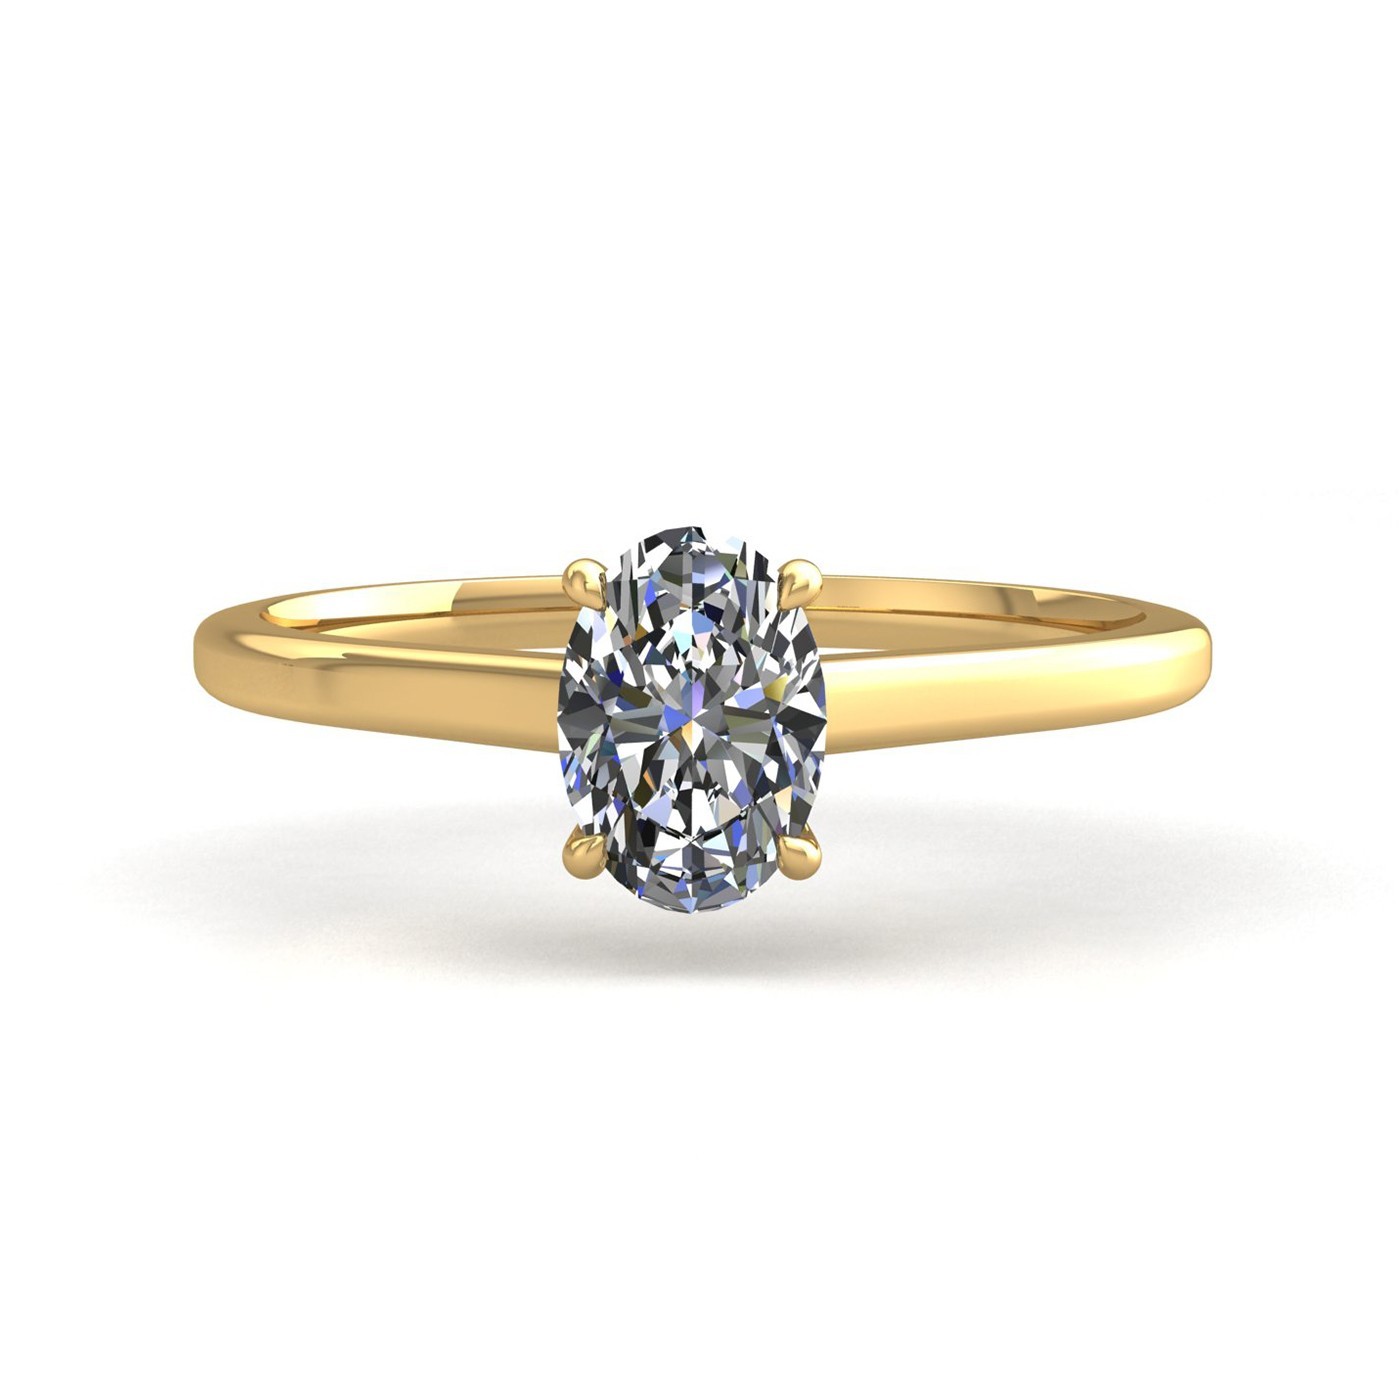 18k yellow gold  2,00 ct 4 prongs solitaire oval cut diamond engagement ring with whisper thin band Photos & images